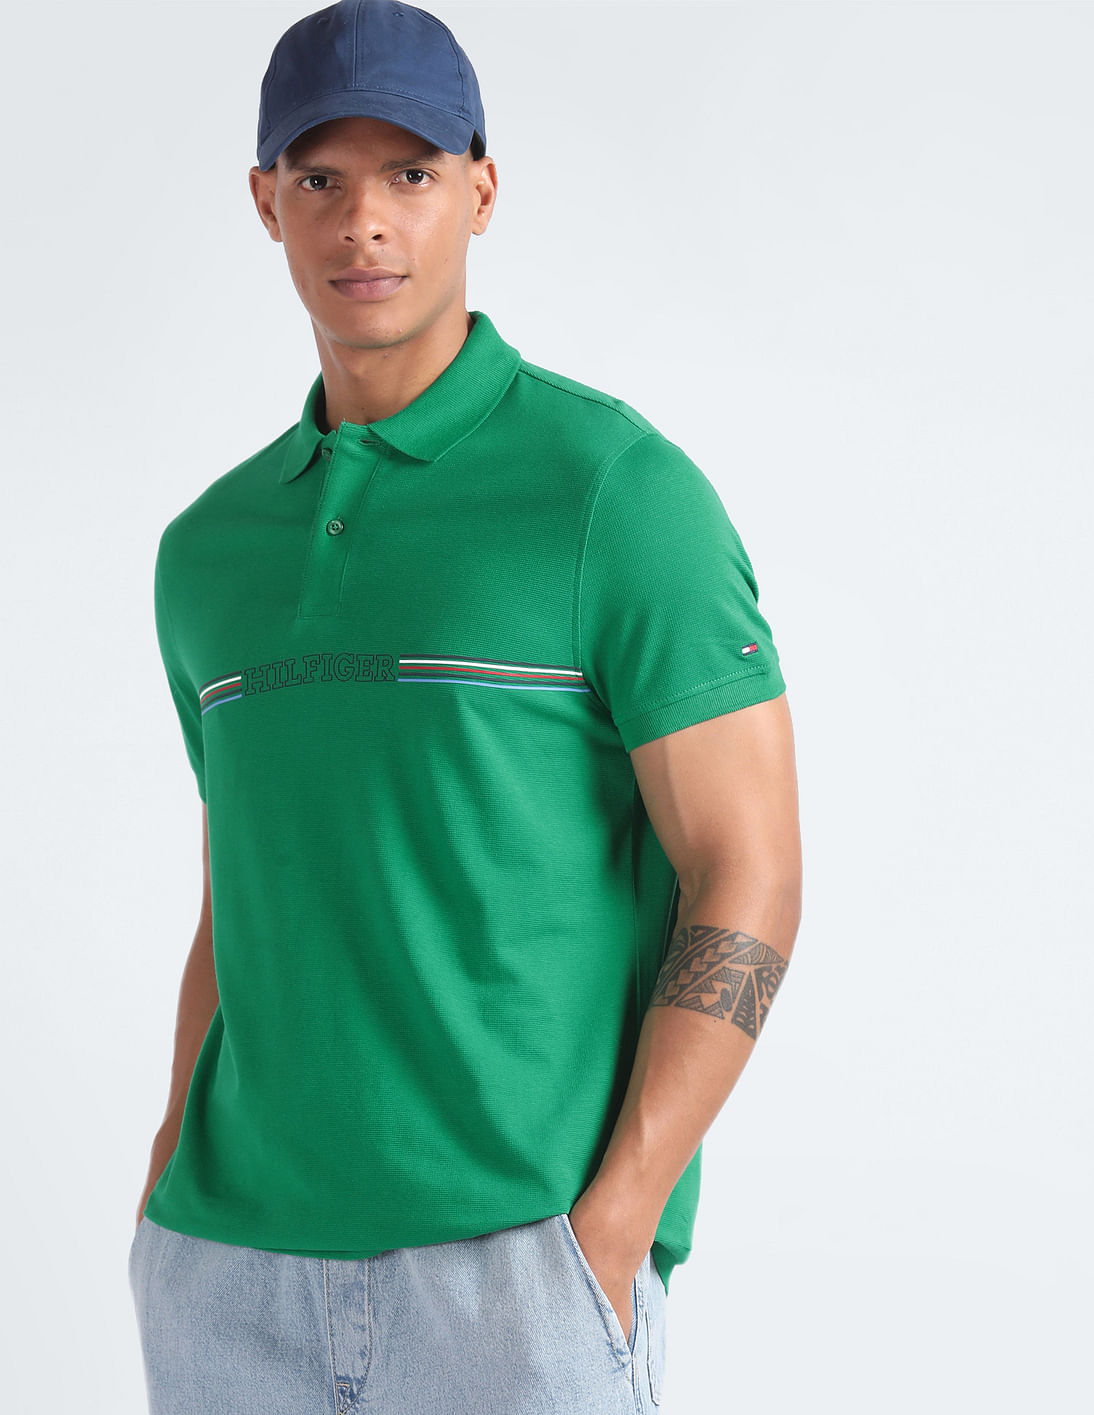 Buy Tommy Hilfiger Brand Stripe Sustainable Polo Shirt - NNNOW.com